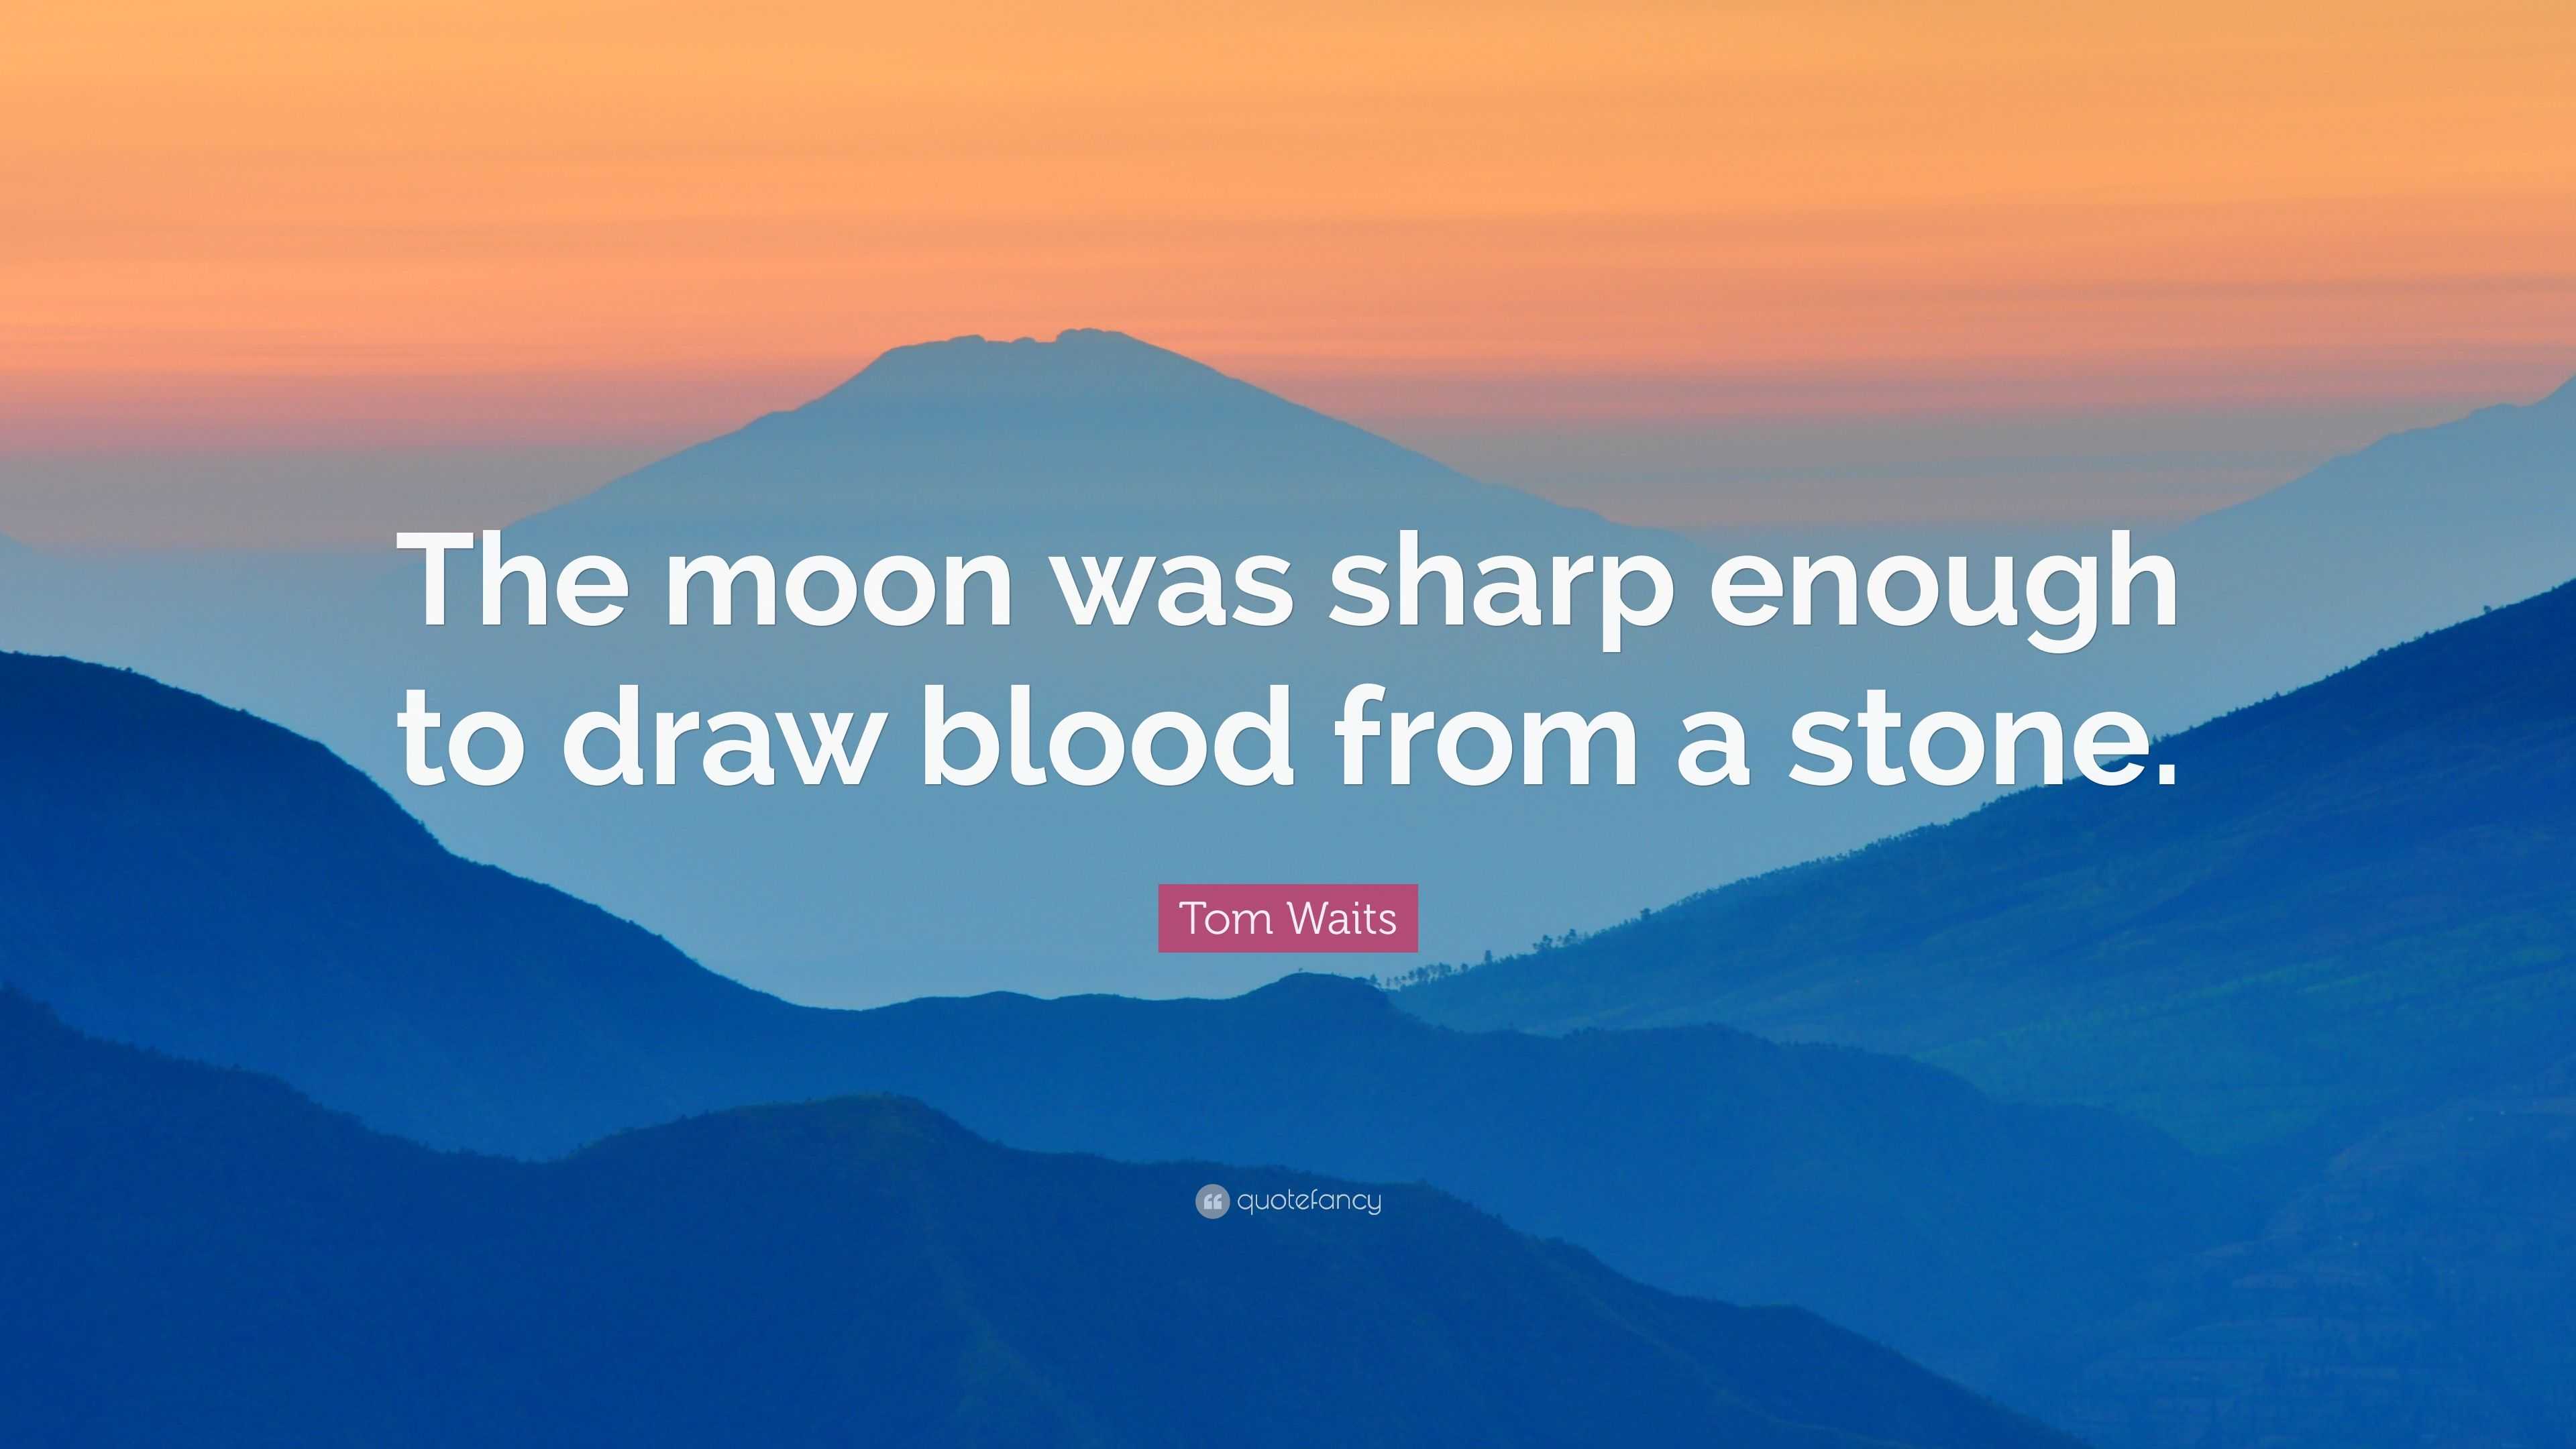 Tom Waits Quote “The moon was sharp enough to draw blood from a stone.”